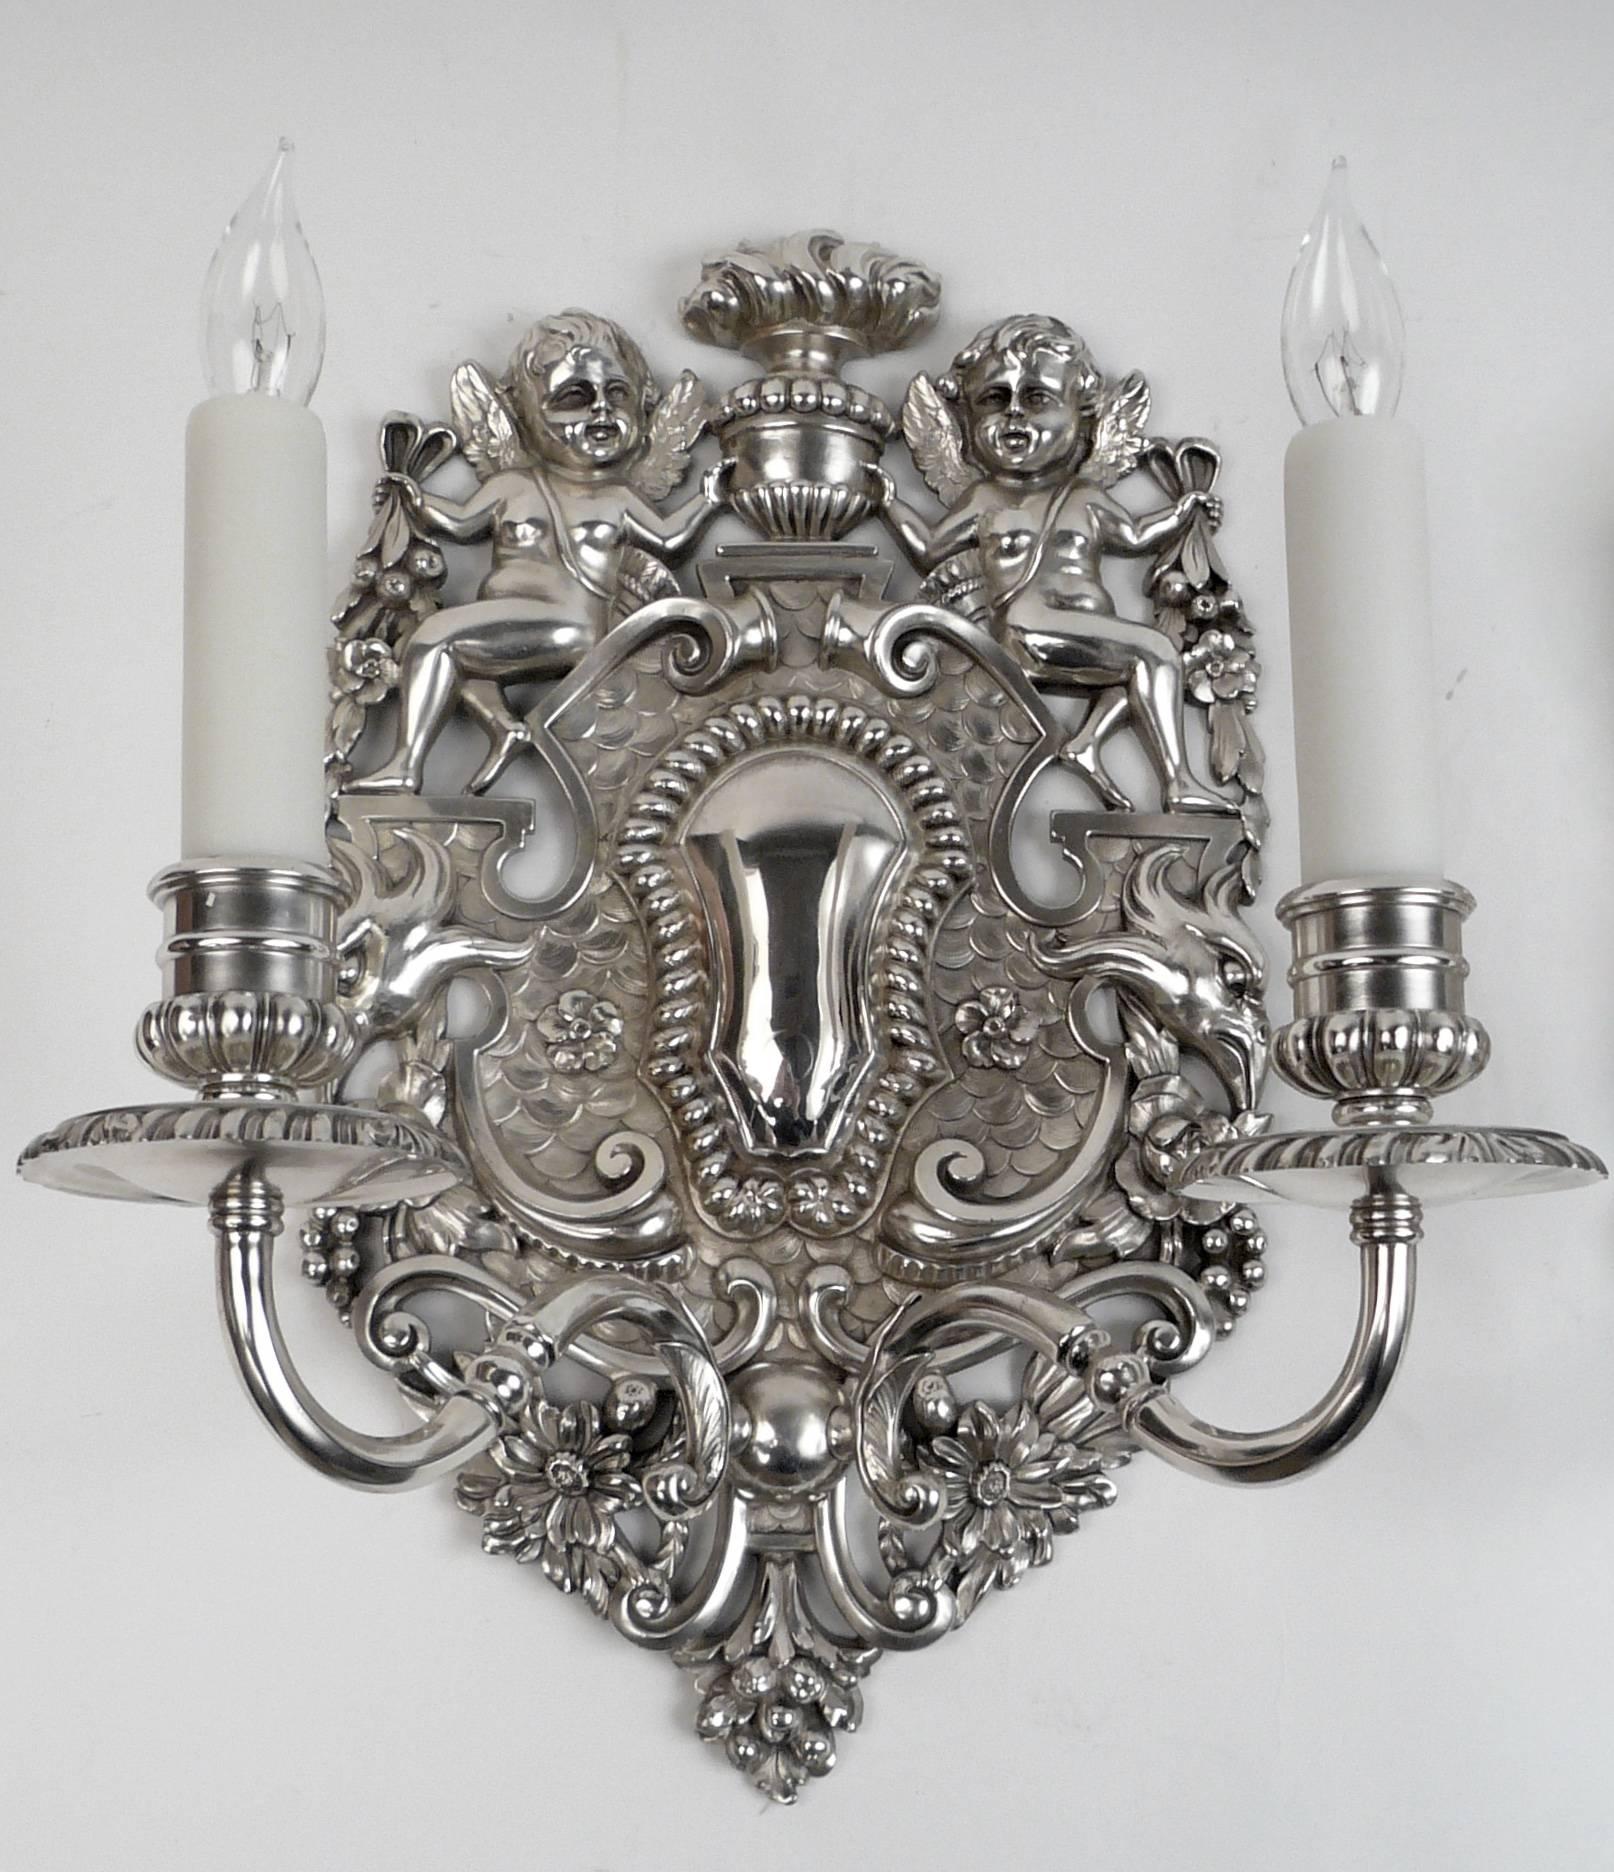 These finely detailed William and Mary style sconces are after a model by London silversmith John Rand, dated 1703.